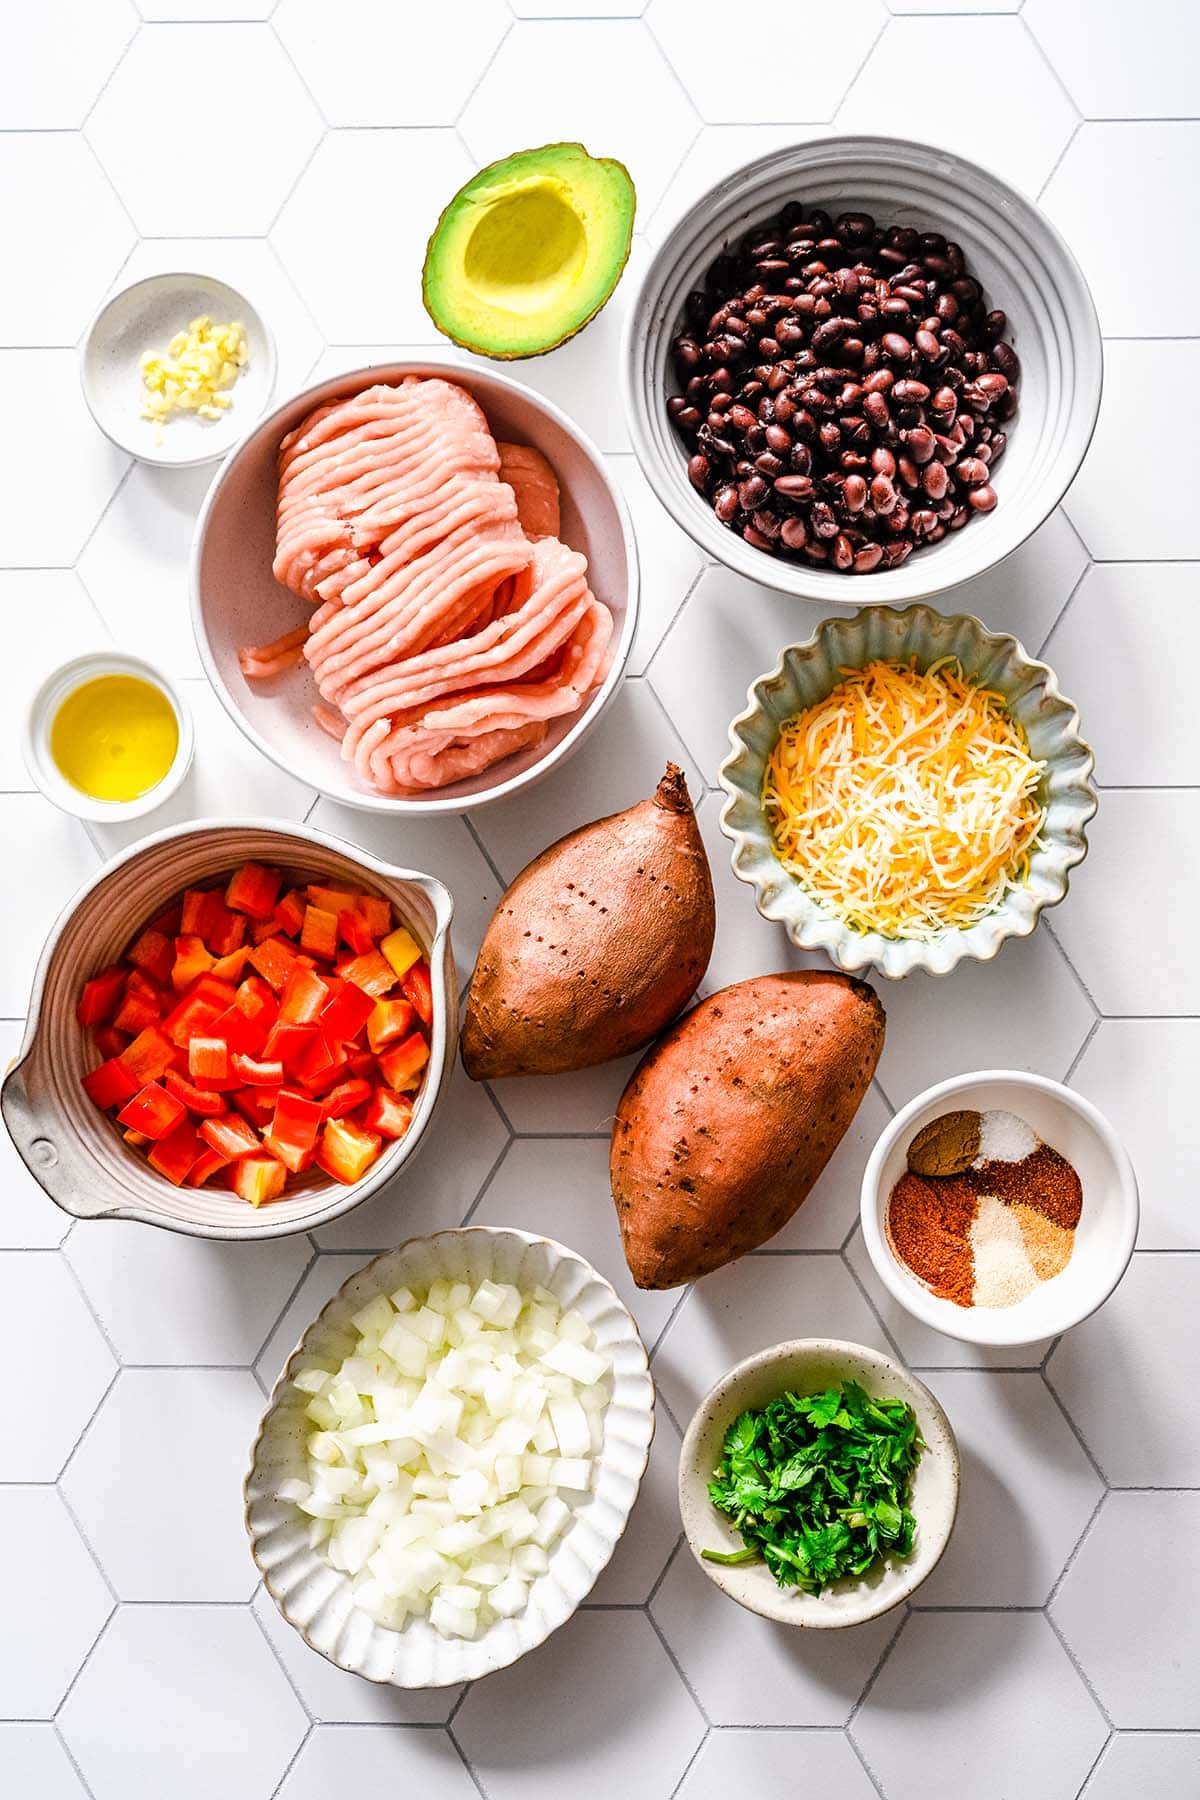 Ingredients needed to make Ground Turkey and Sweet Potato skillet, viewed from overhead on a white hexagon tile background.